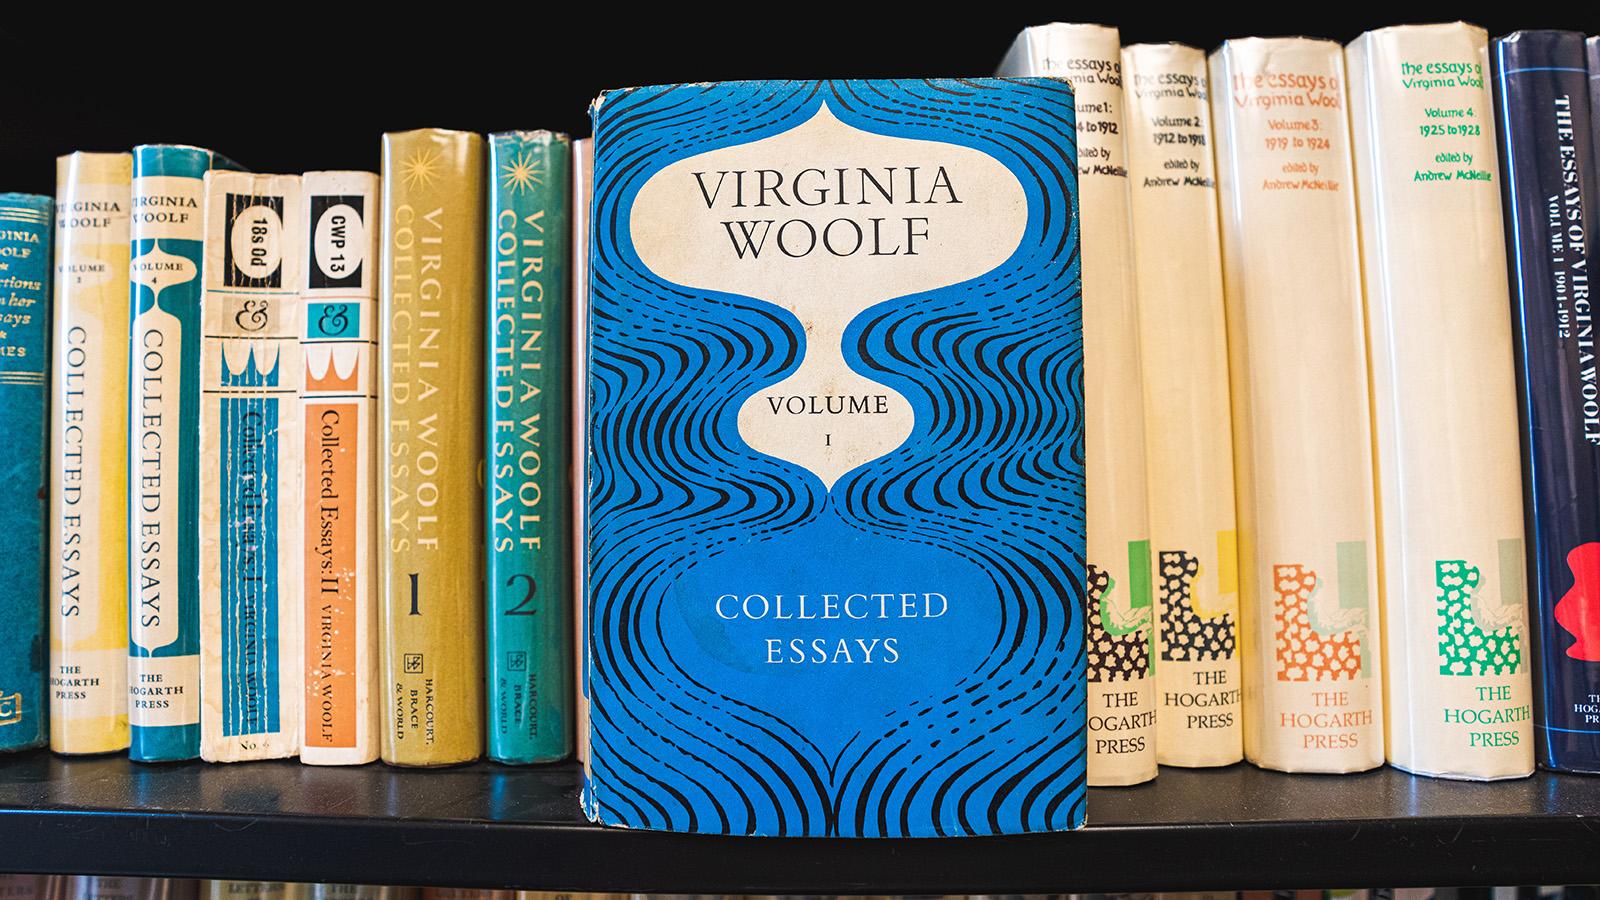 A blue copy of Virgina Woolf's collected essays stands upright in front of a row of books